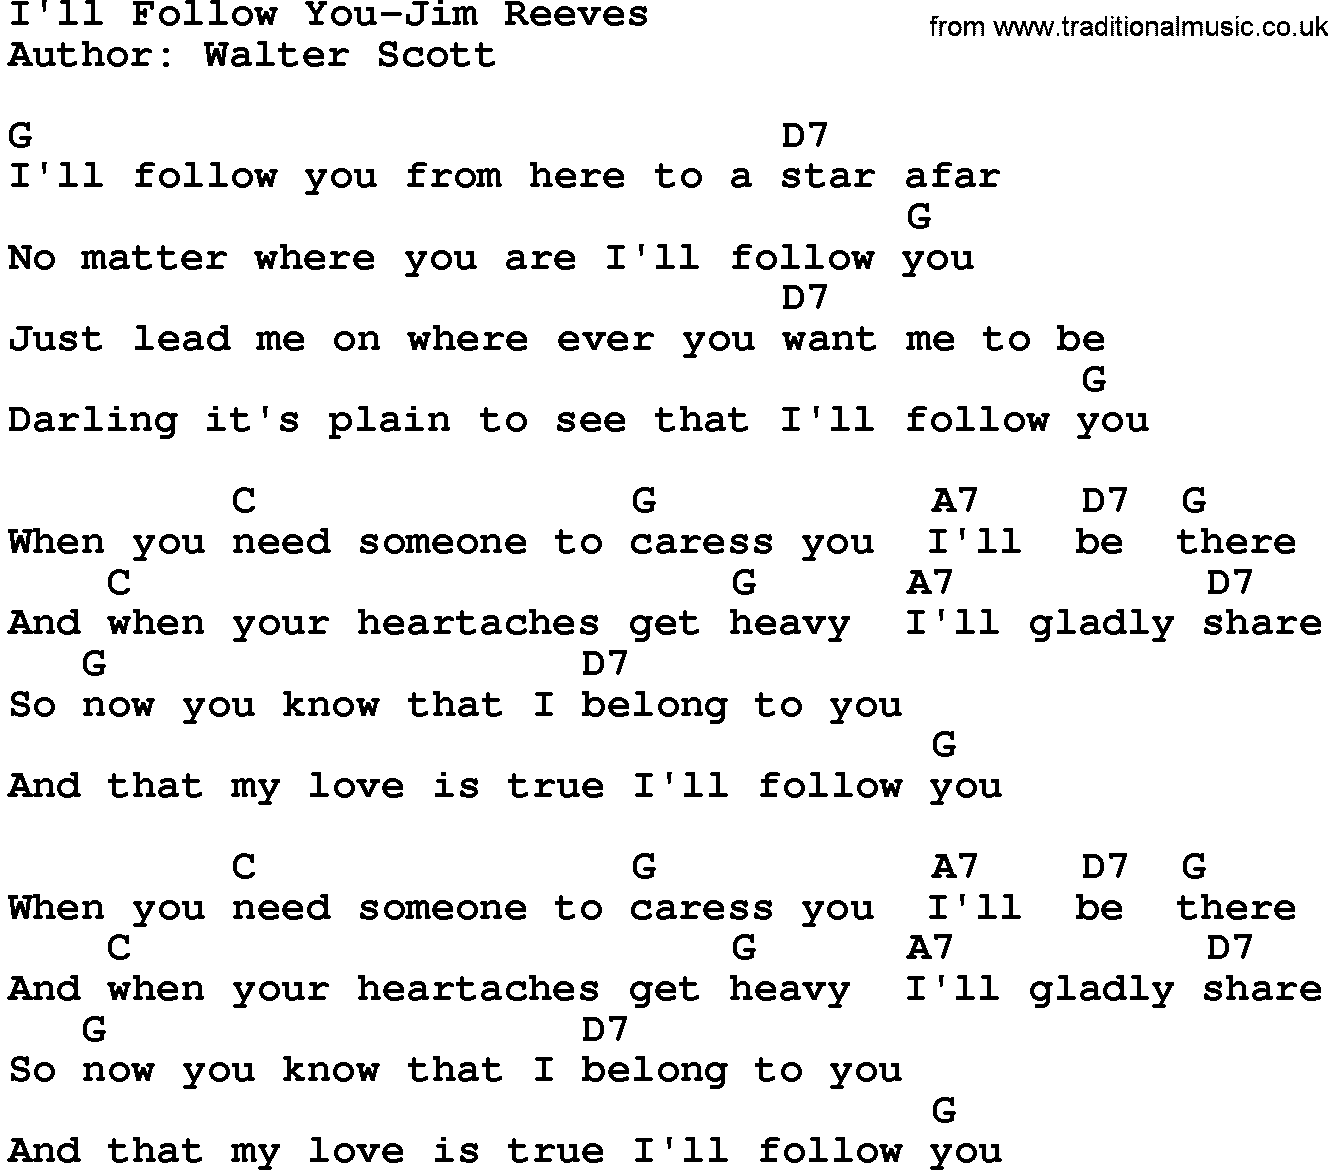 Country music song: I'll Follow You-Jim Reeves lyrics and chords